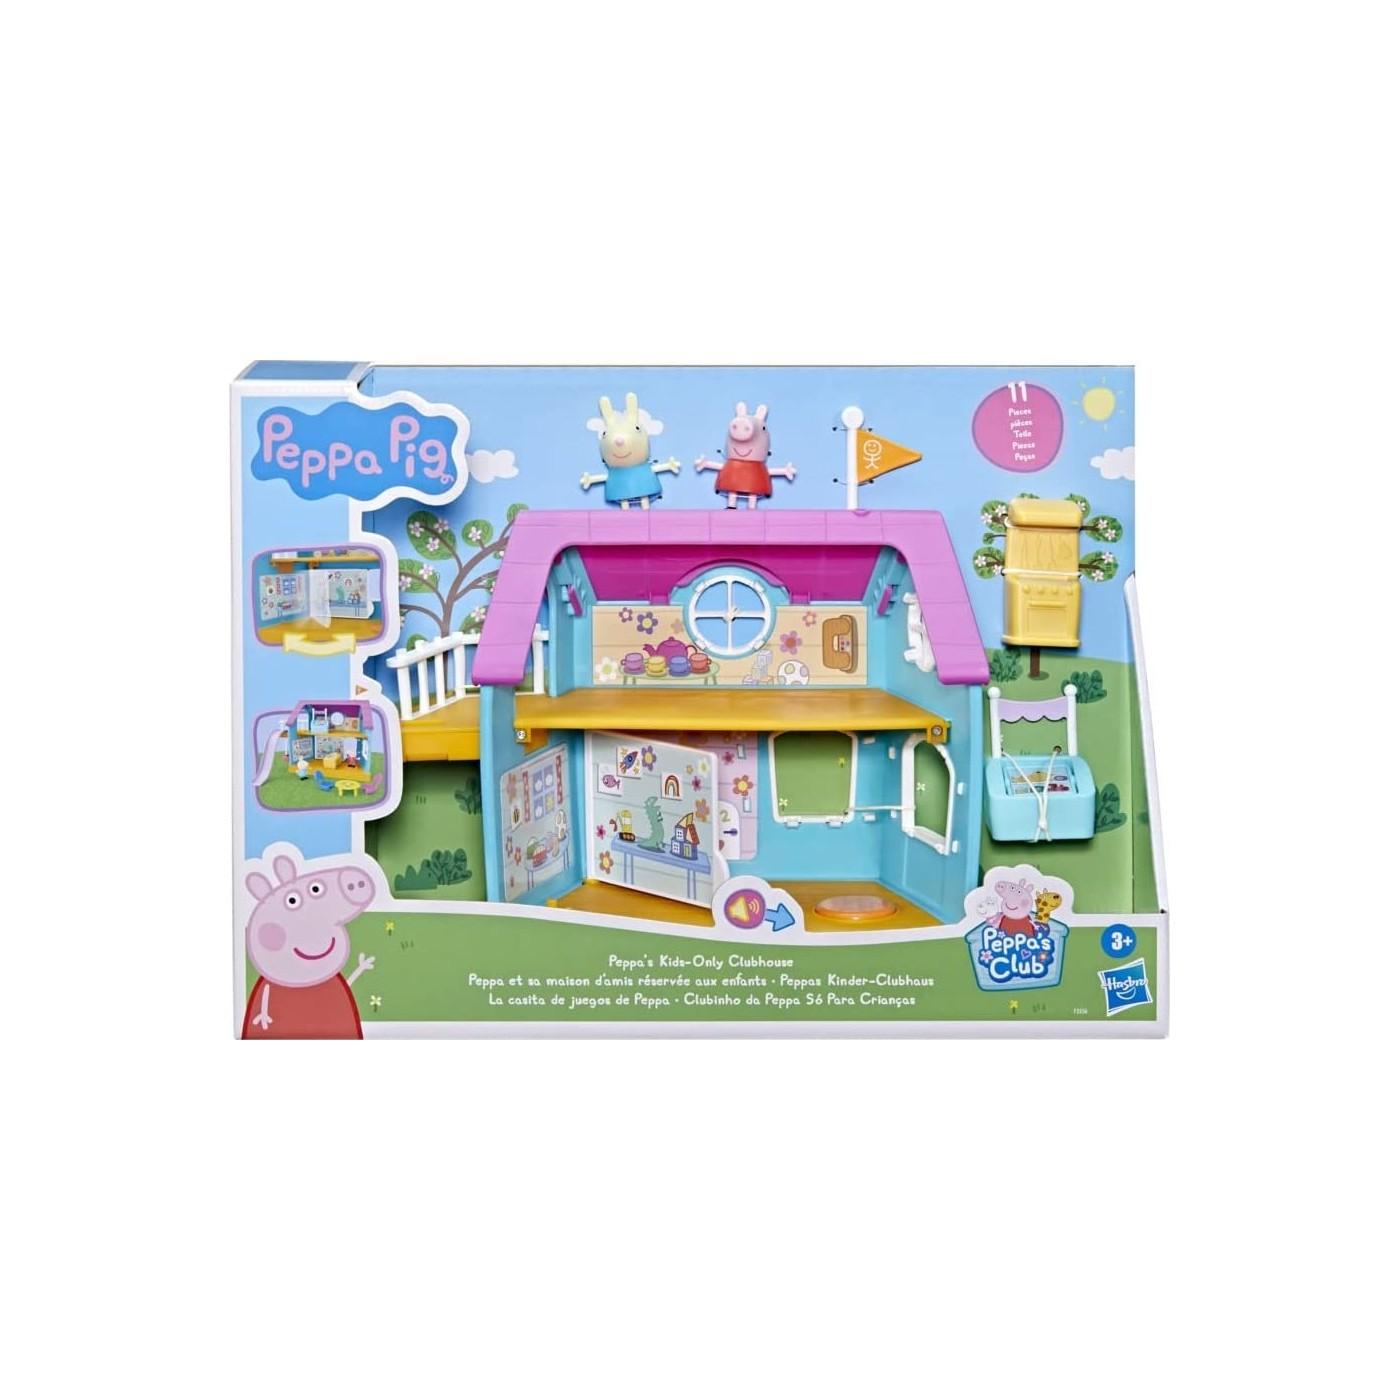 Selected image for HASBRO Kućica Peppa Pig Kids only clubhouse